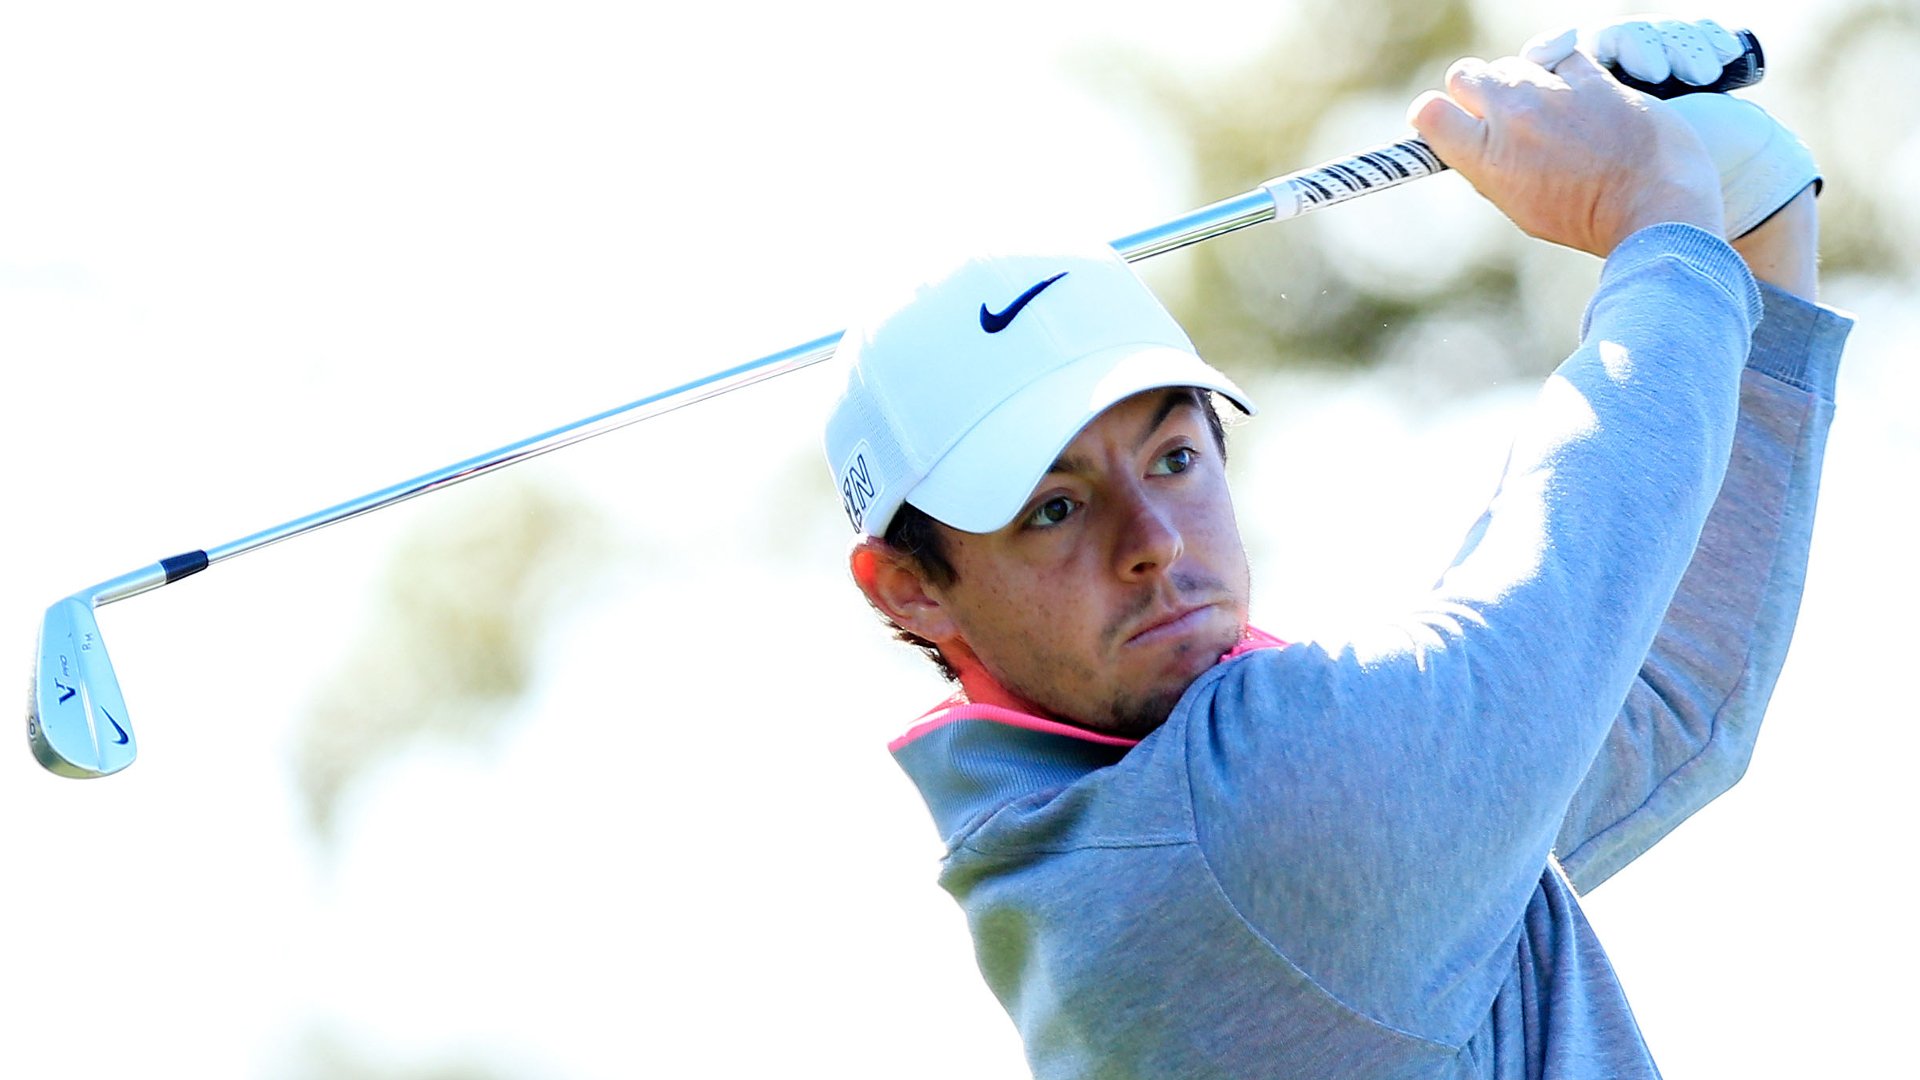 Happy birthday to four-time major championship winner, Rory McIlroy! 